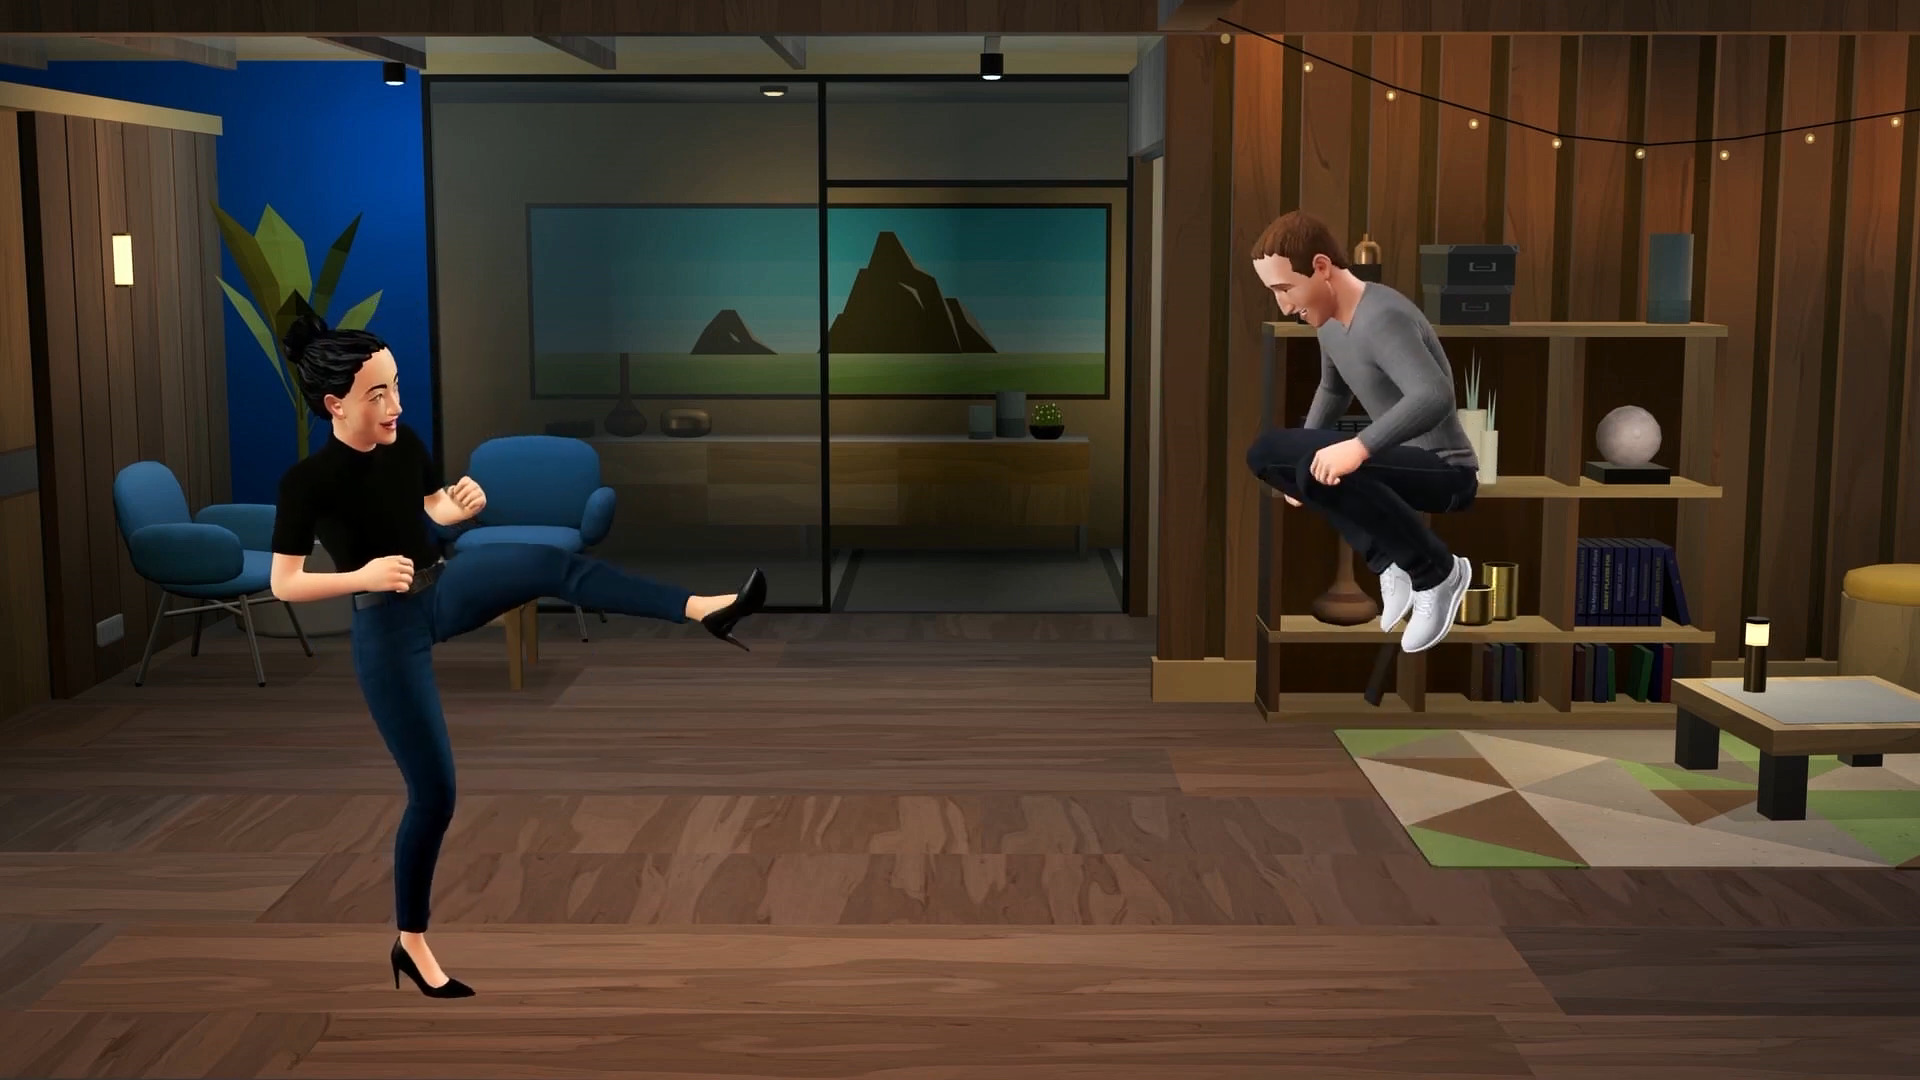 An image of Mark Zuckerberg and a colleague showing off their legs in the metaverse